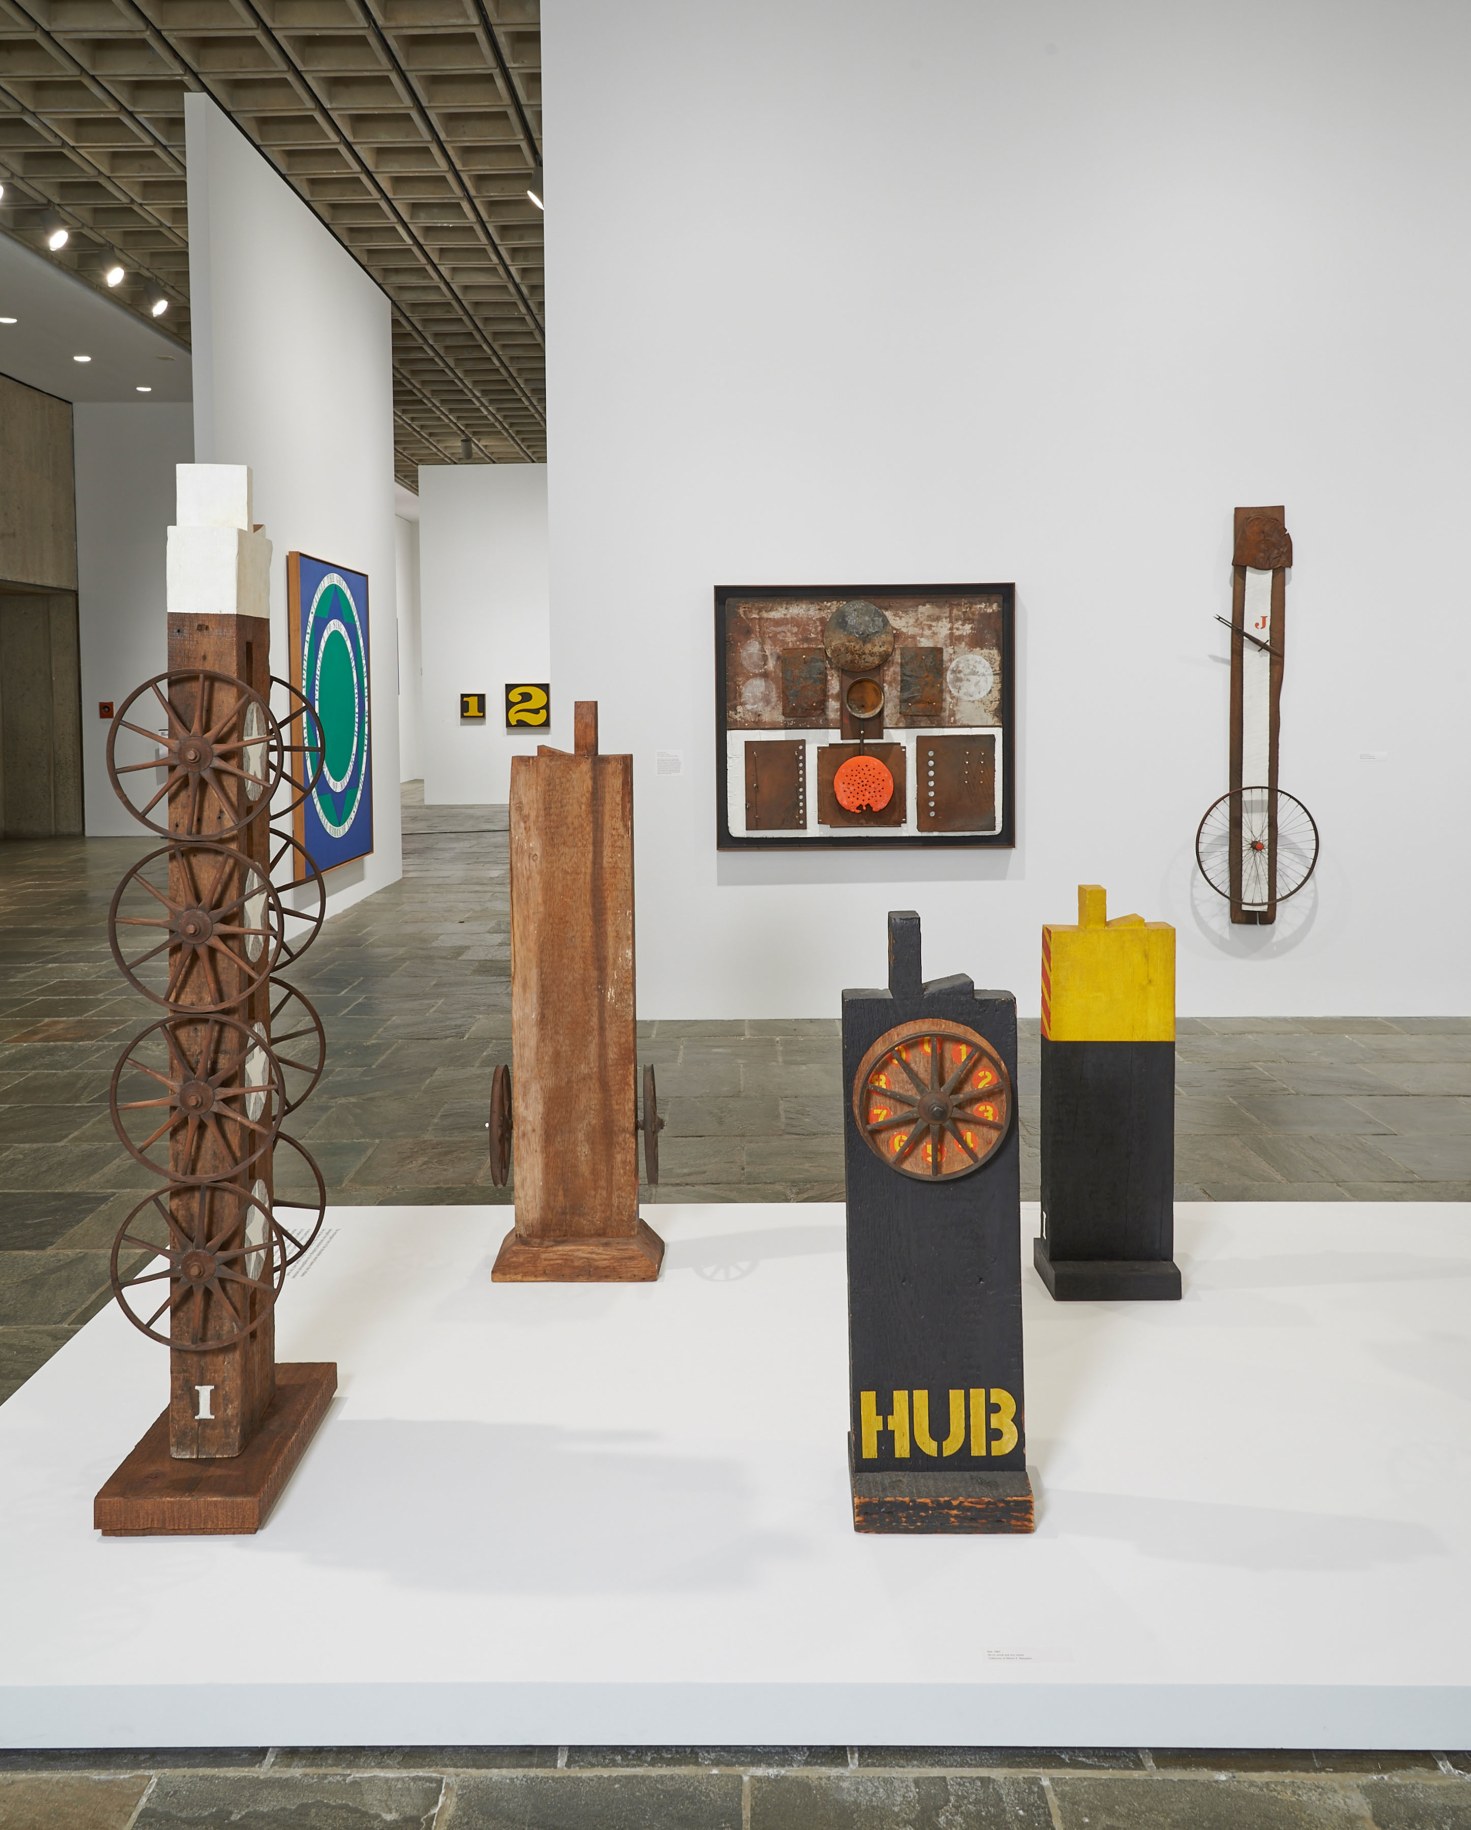 Installation view of&nbsp;Robert Indiana: Beyond LOVE, Whitney Museum of American Art, New York, September 26, 2013&ndash;January 5, 2014, with Jeanne d&rsquo;Arc (1960&ndash;62) hanging on the far right, &nbsp;